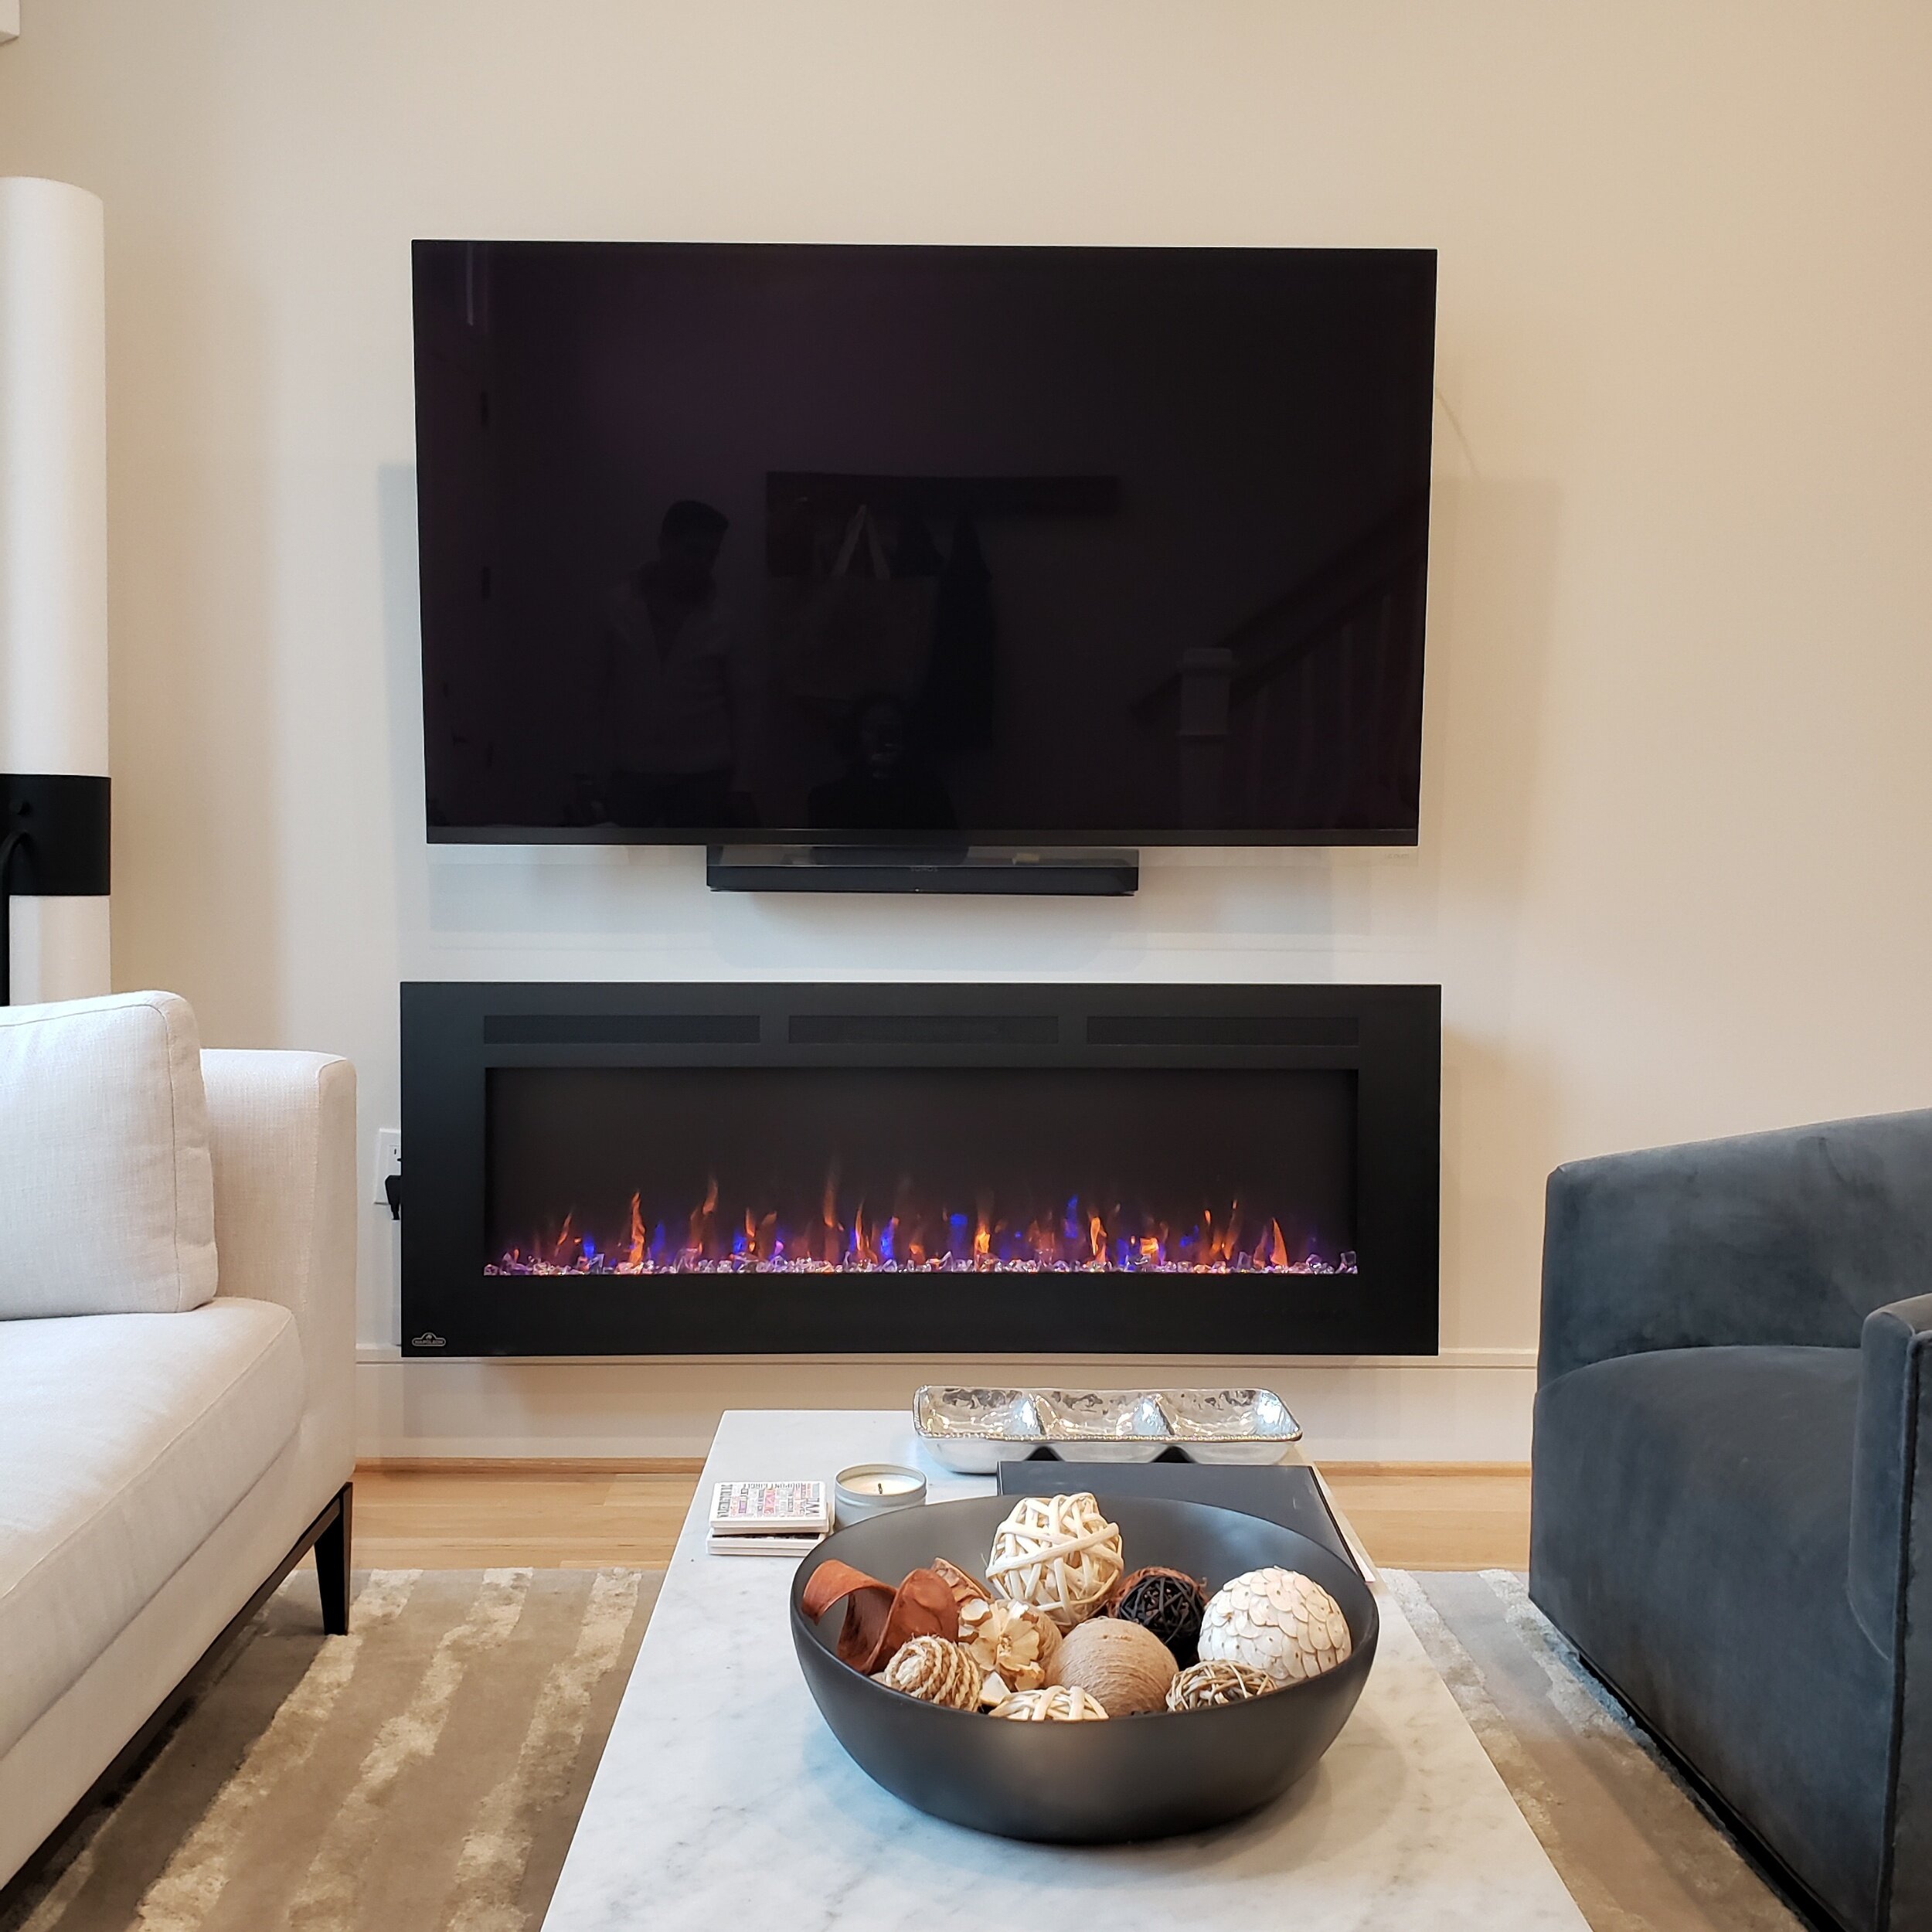  We install electric fireplaces. 